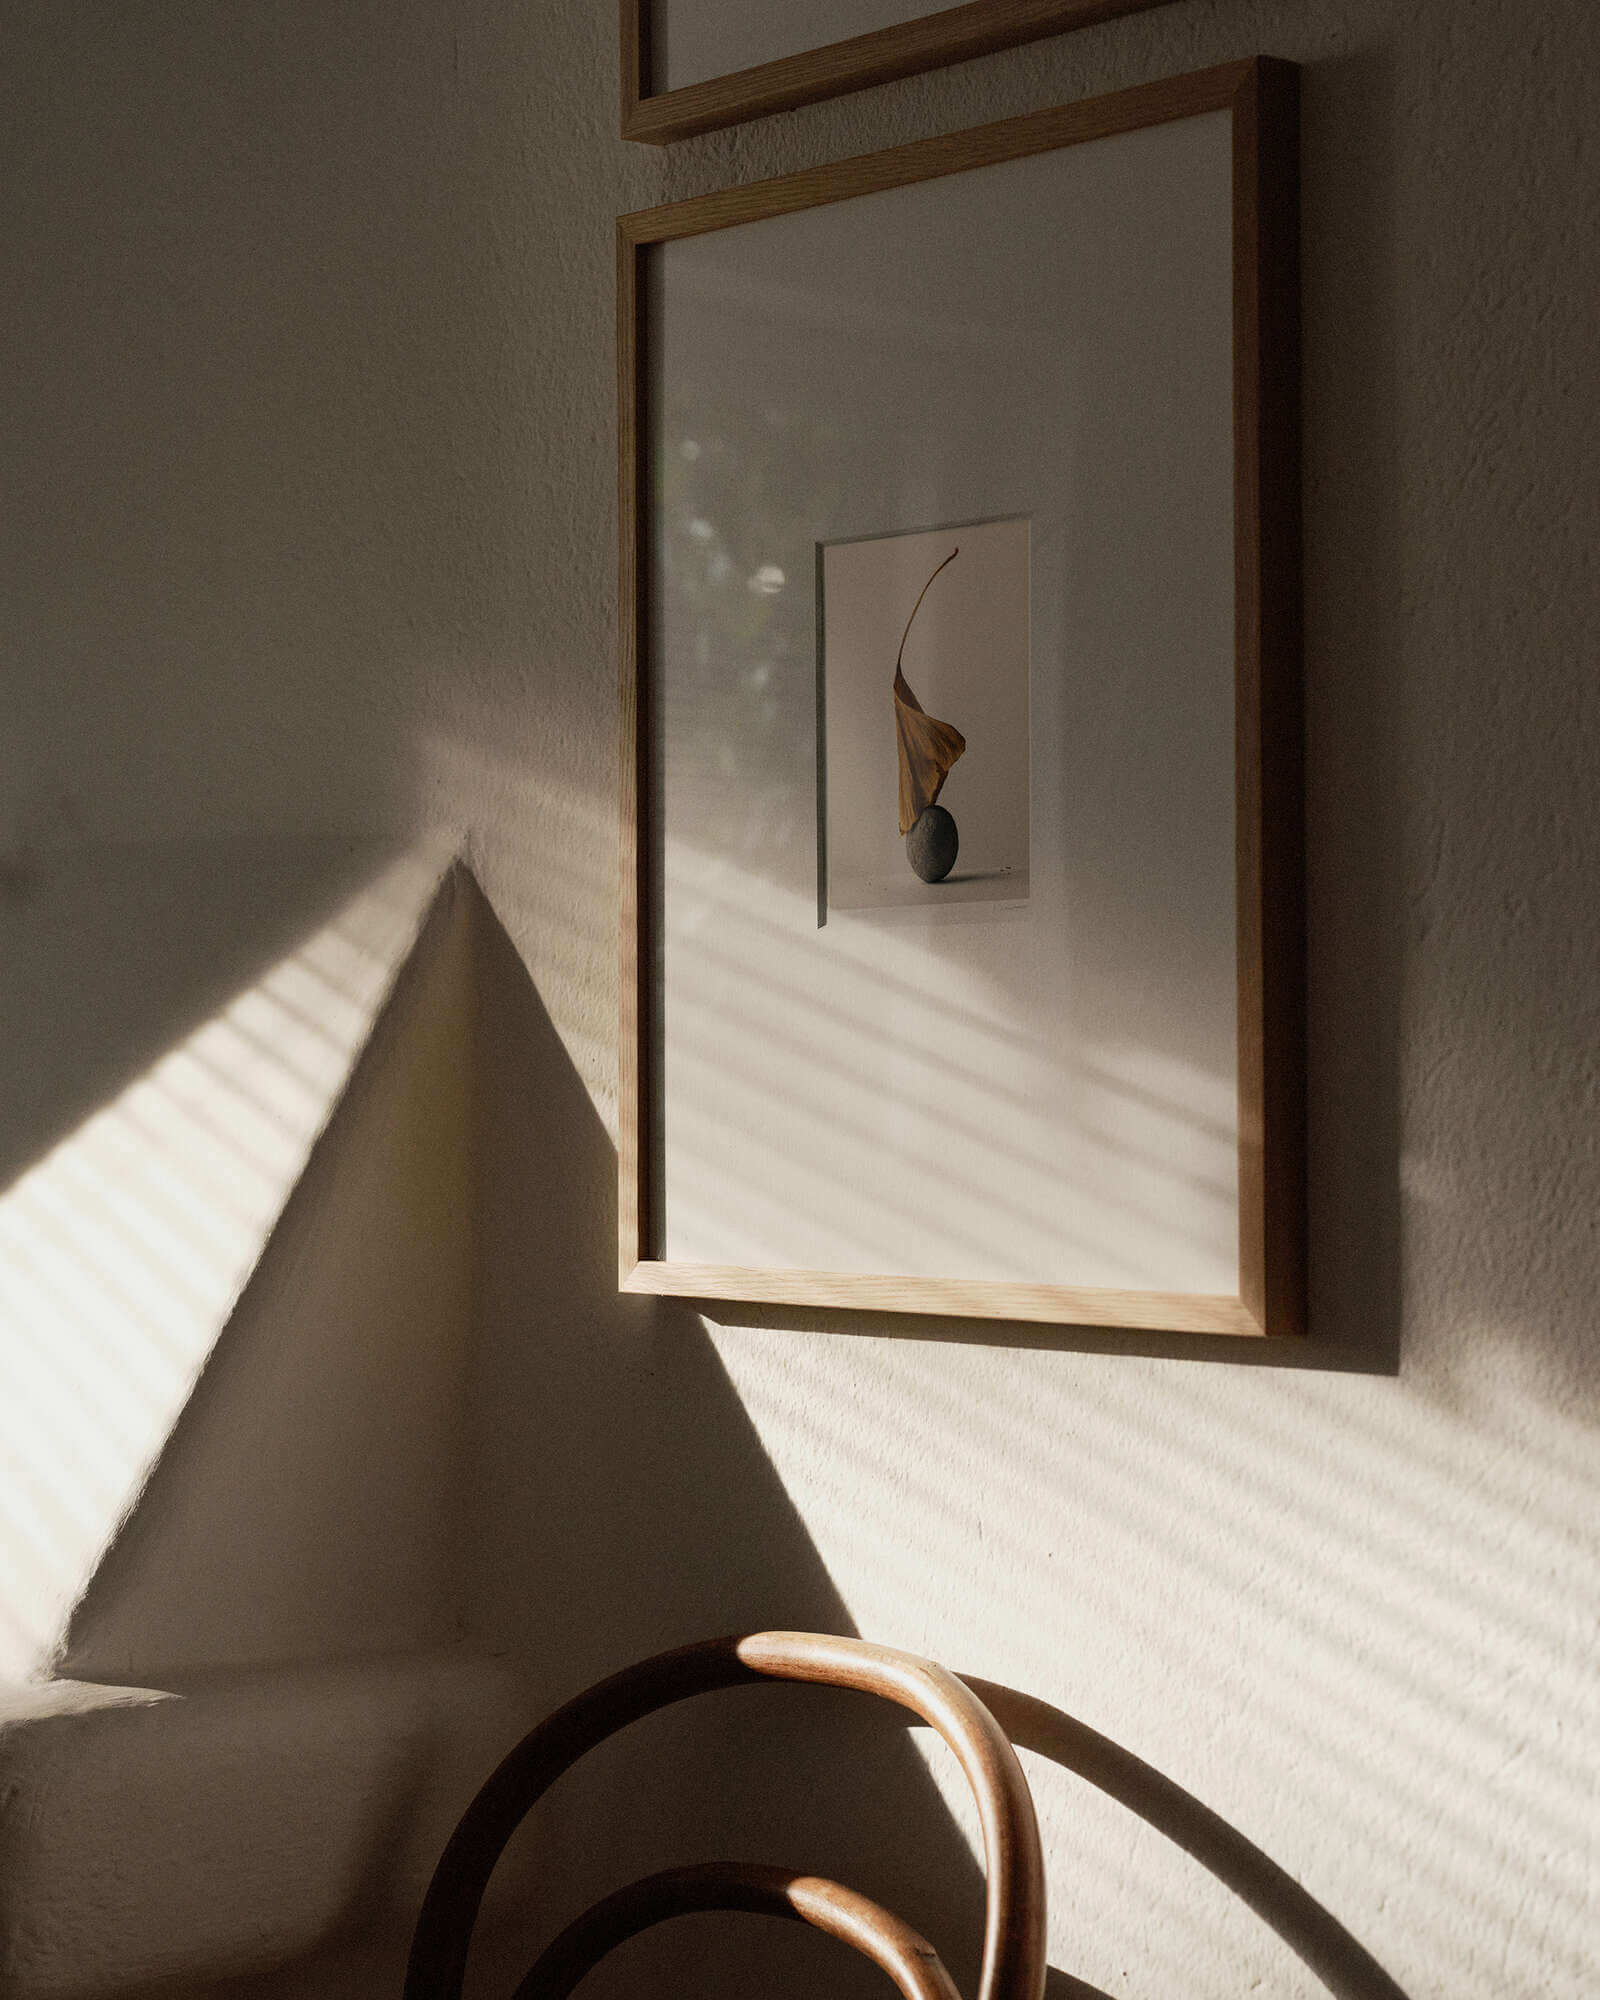 The Fine Art print Monument no.96, by Christian Svinddal shown in an inspirational interior design setting.